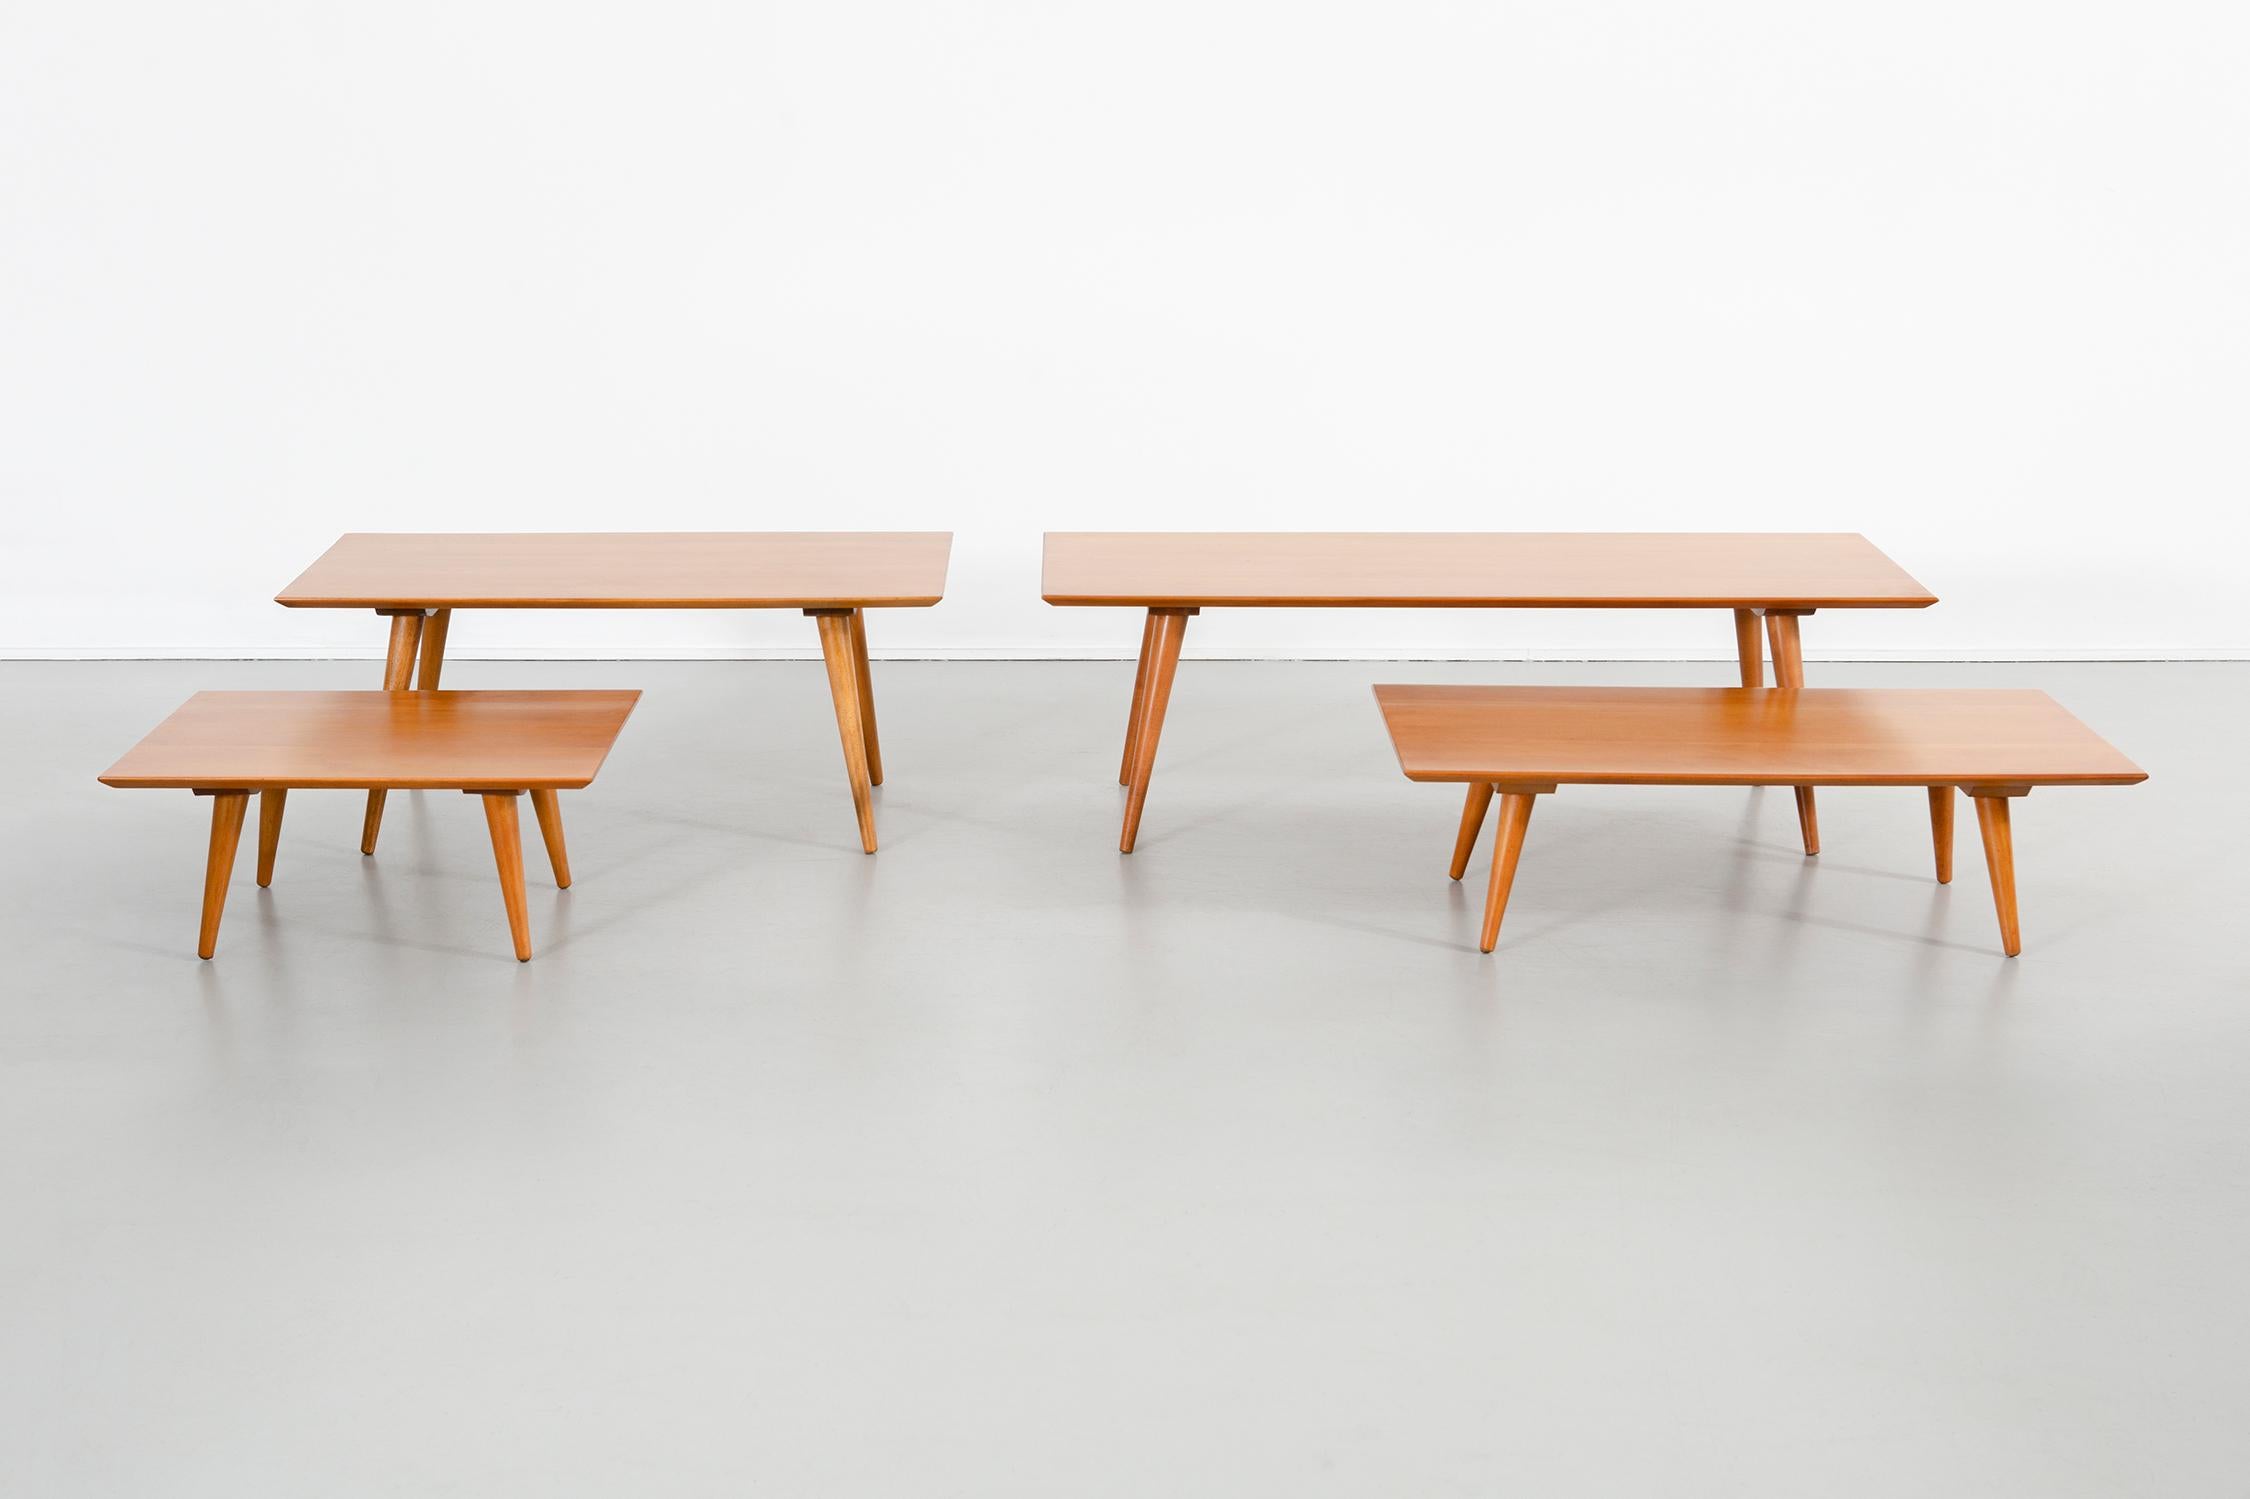 Set of four tables

Designed by Paul McCobb for Winchendon 

USA, circa 1950s 

Maple 

Measures: 15 1/16” H x 36” W x 18 ?” D 

10 ¼” H x 24” W x 18 ¼” D 

14 ?” H x 48” W x 18 ?” D 

10 ¼” H x 36” W x 18 ?” D.